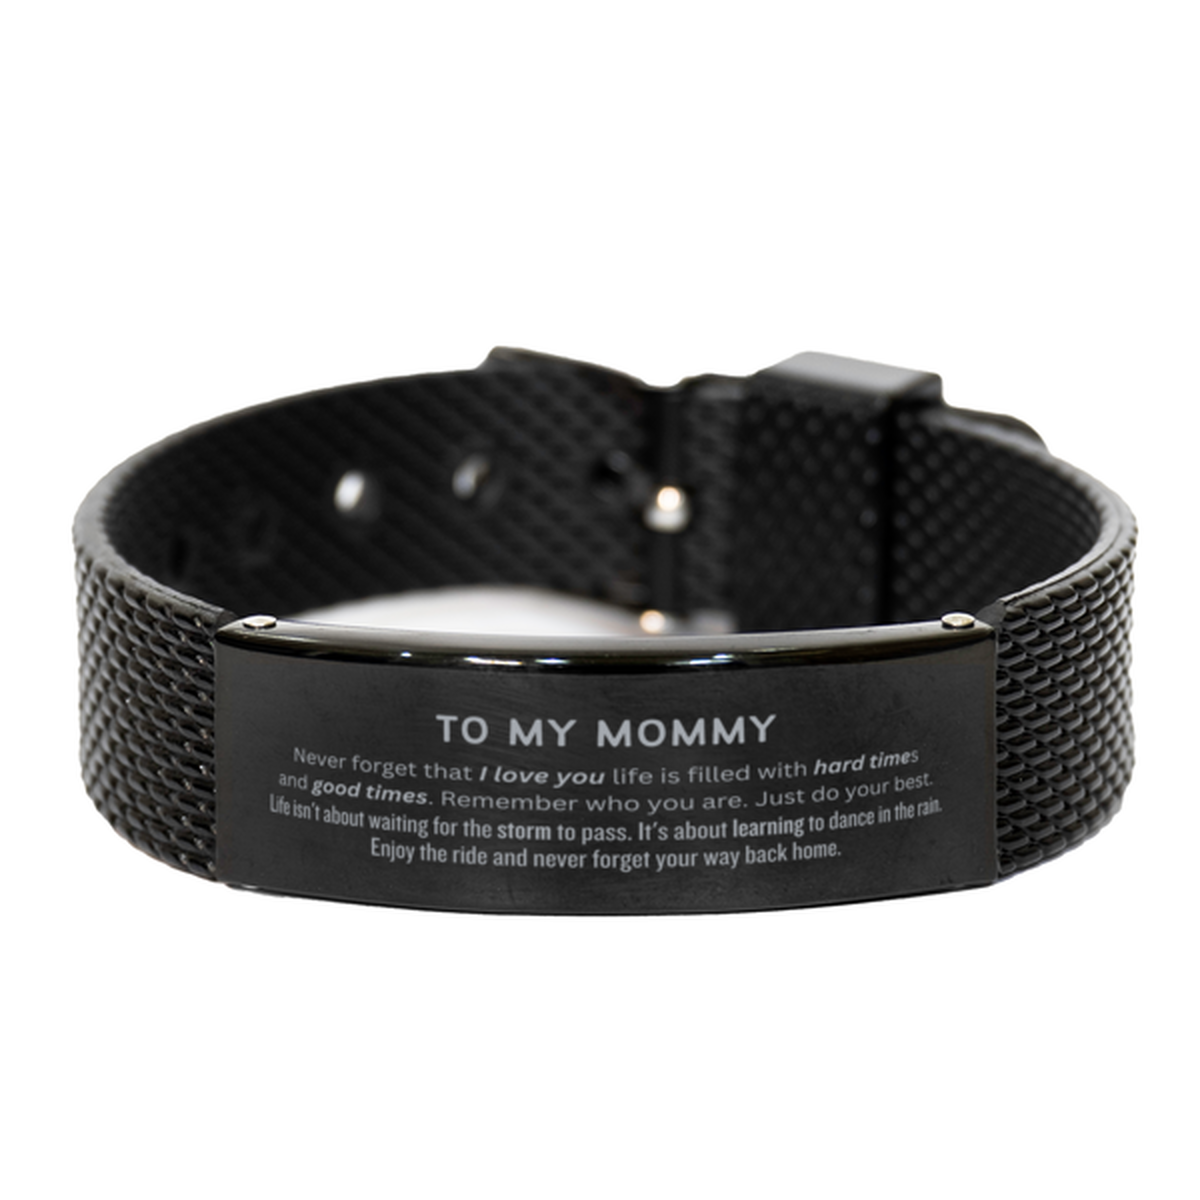 Christmas Mommy Black Shark Mesh Bracelet Gifts, To My Mommy Birthday Thank You Gifts For Mommy, Graduation Unique Gifts For Mommy To My Mommy Never forget that I love you life is filled with hard times and good times. Remember who you are. Just do your b